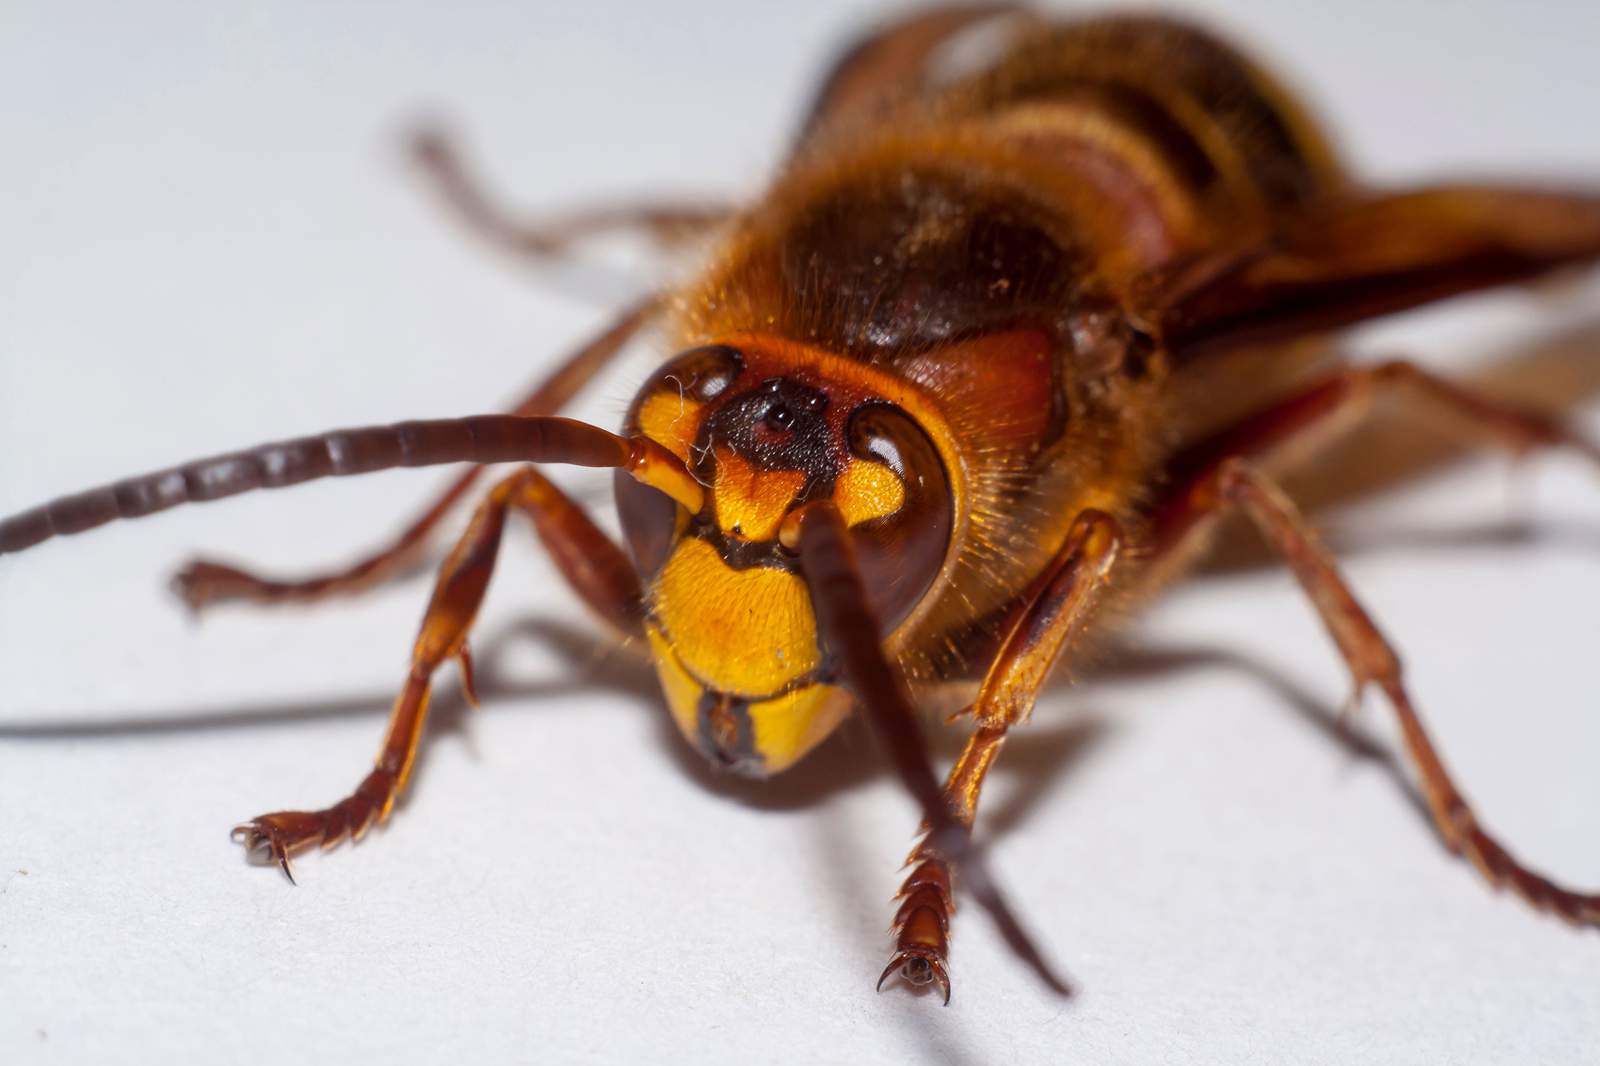 Invasive ‘murder hornets’ have been spotted in the US for the first time